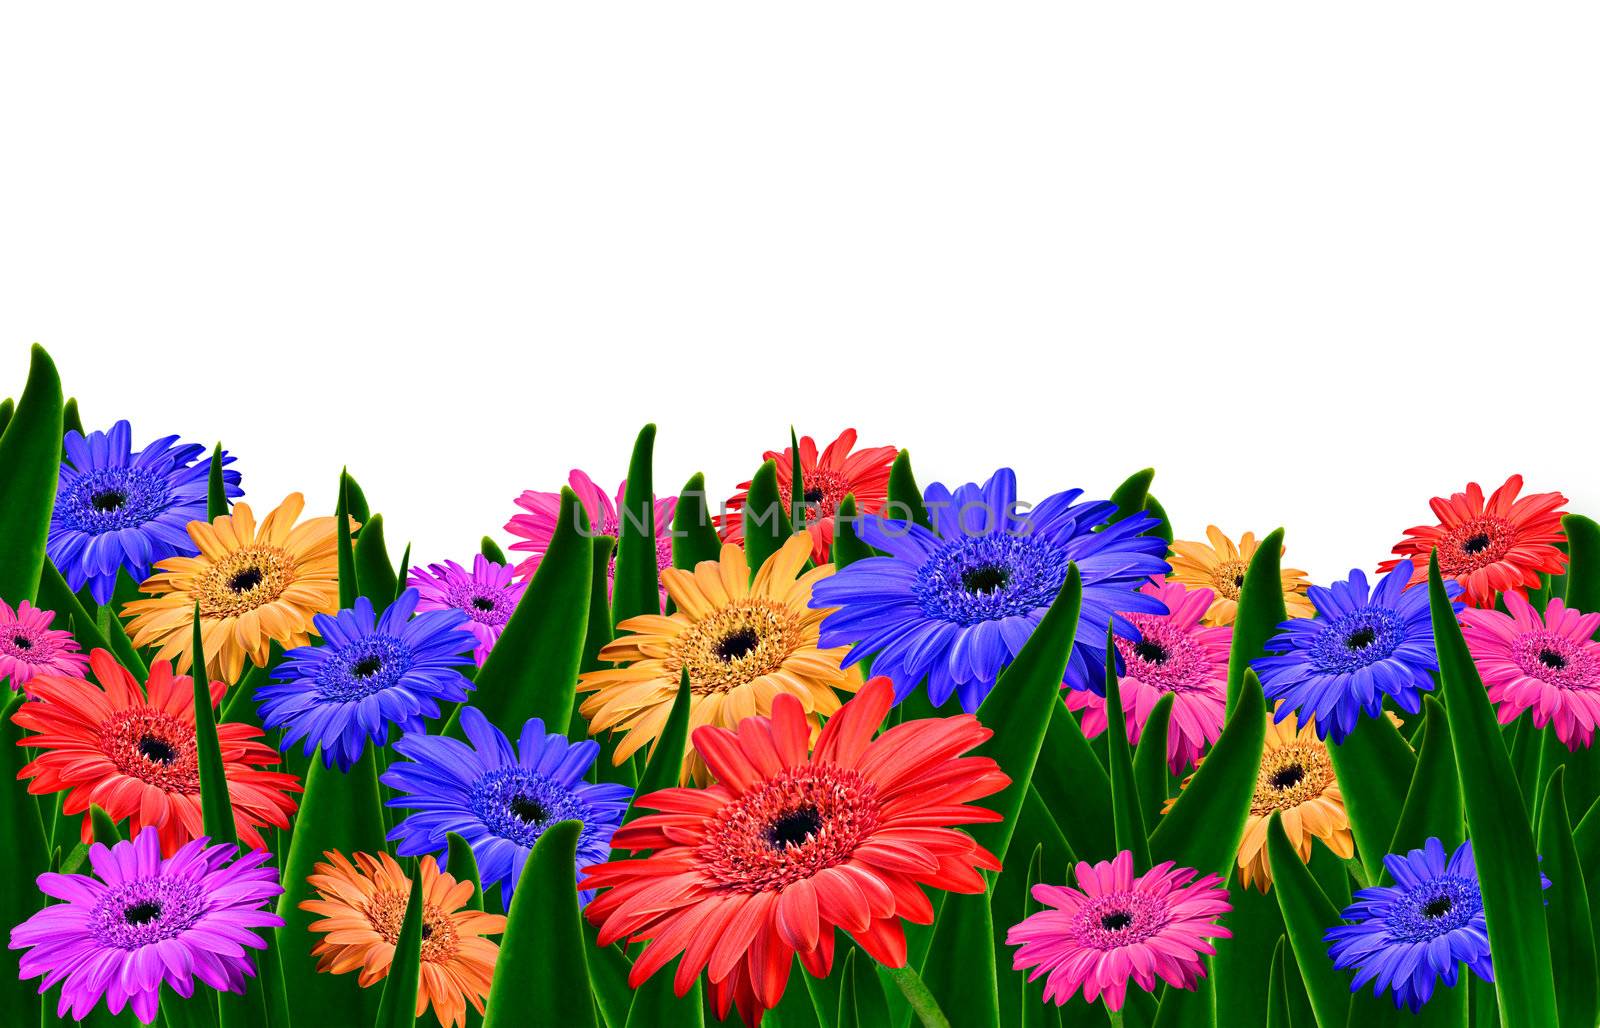 Colorful daisy gerbera flowers in a field - spring background